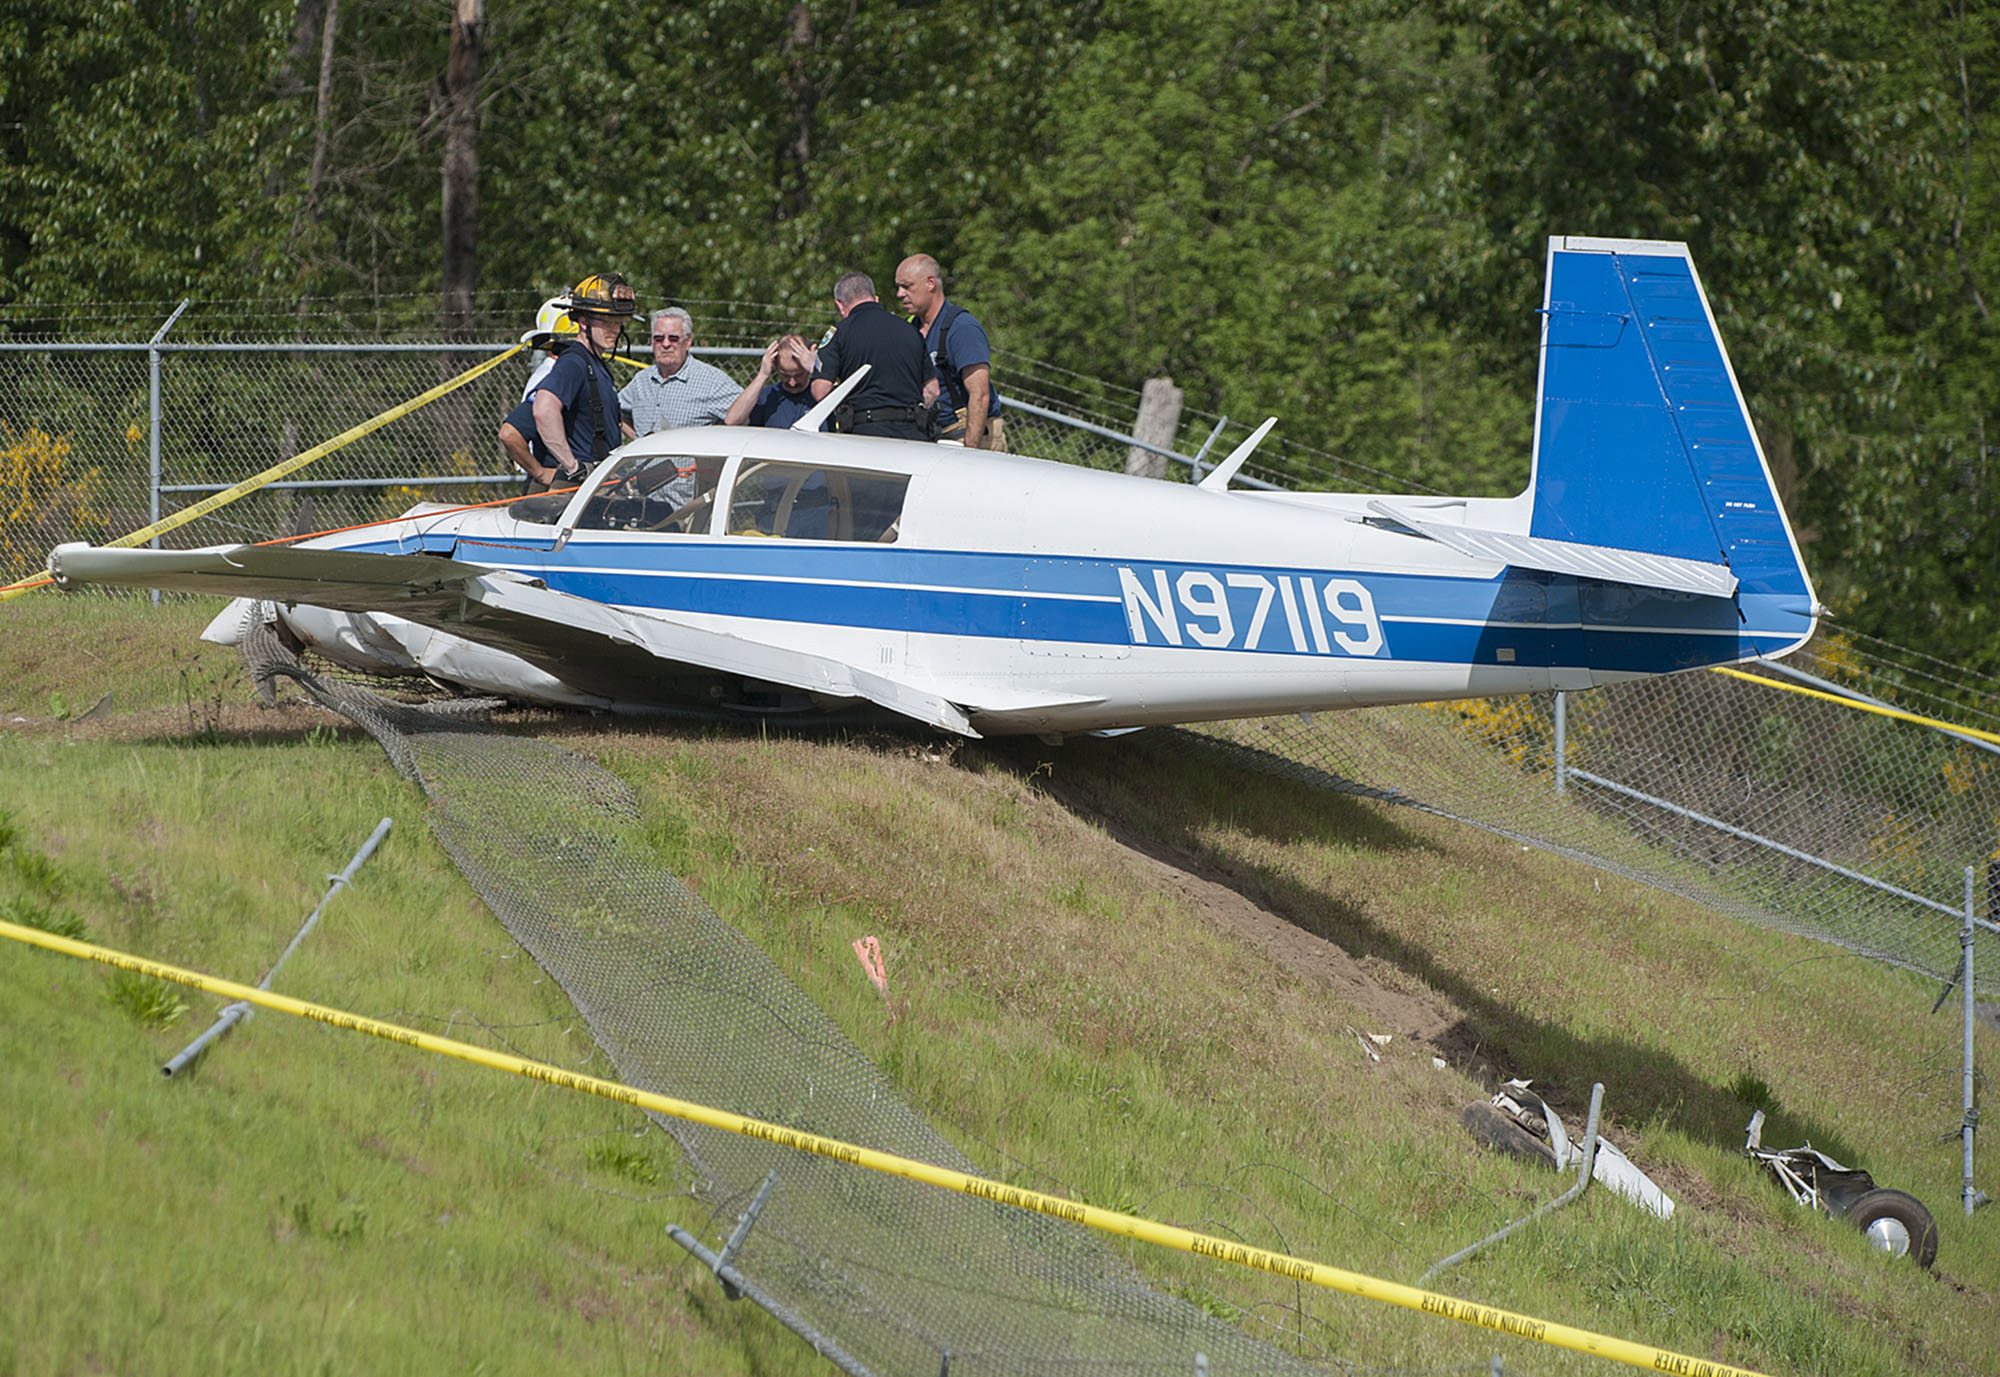 Officials and firefighters look over the wreckage after a small plane crashed Thursday afternoon, April 21, 2016 at Woodland Airport.